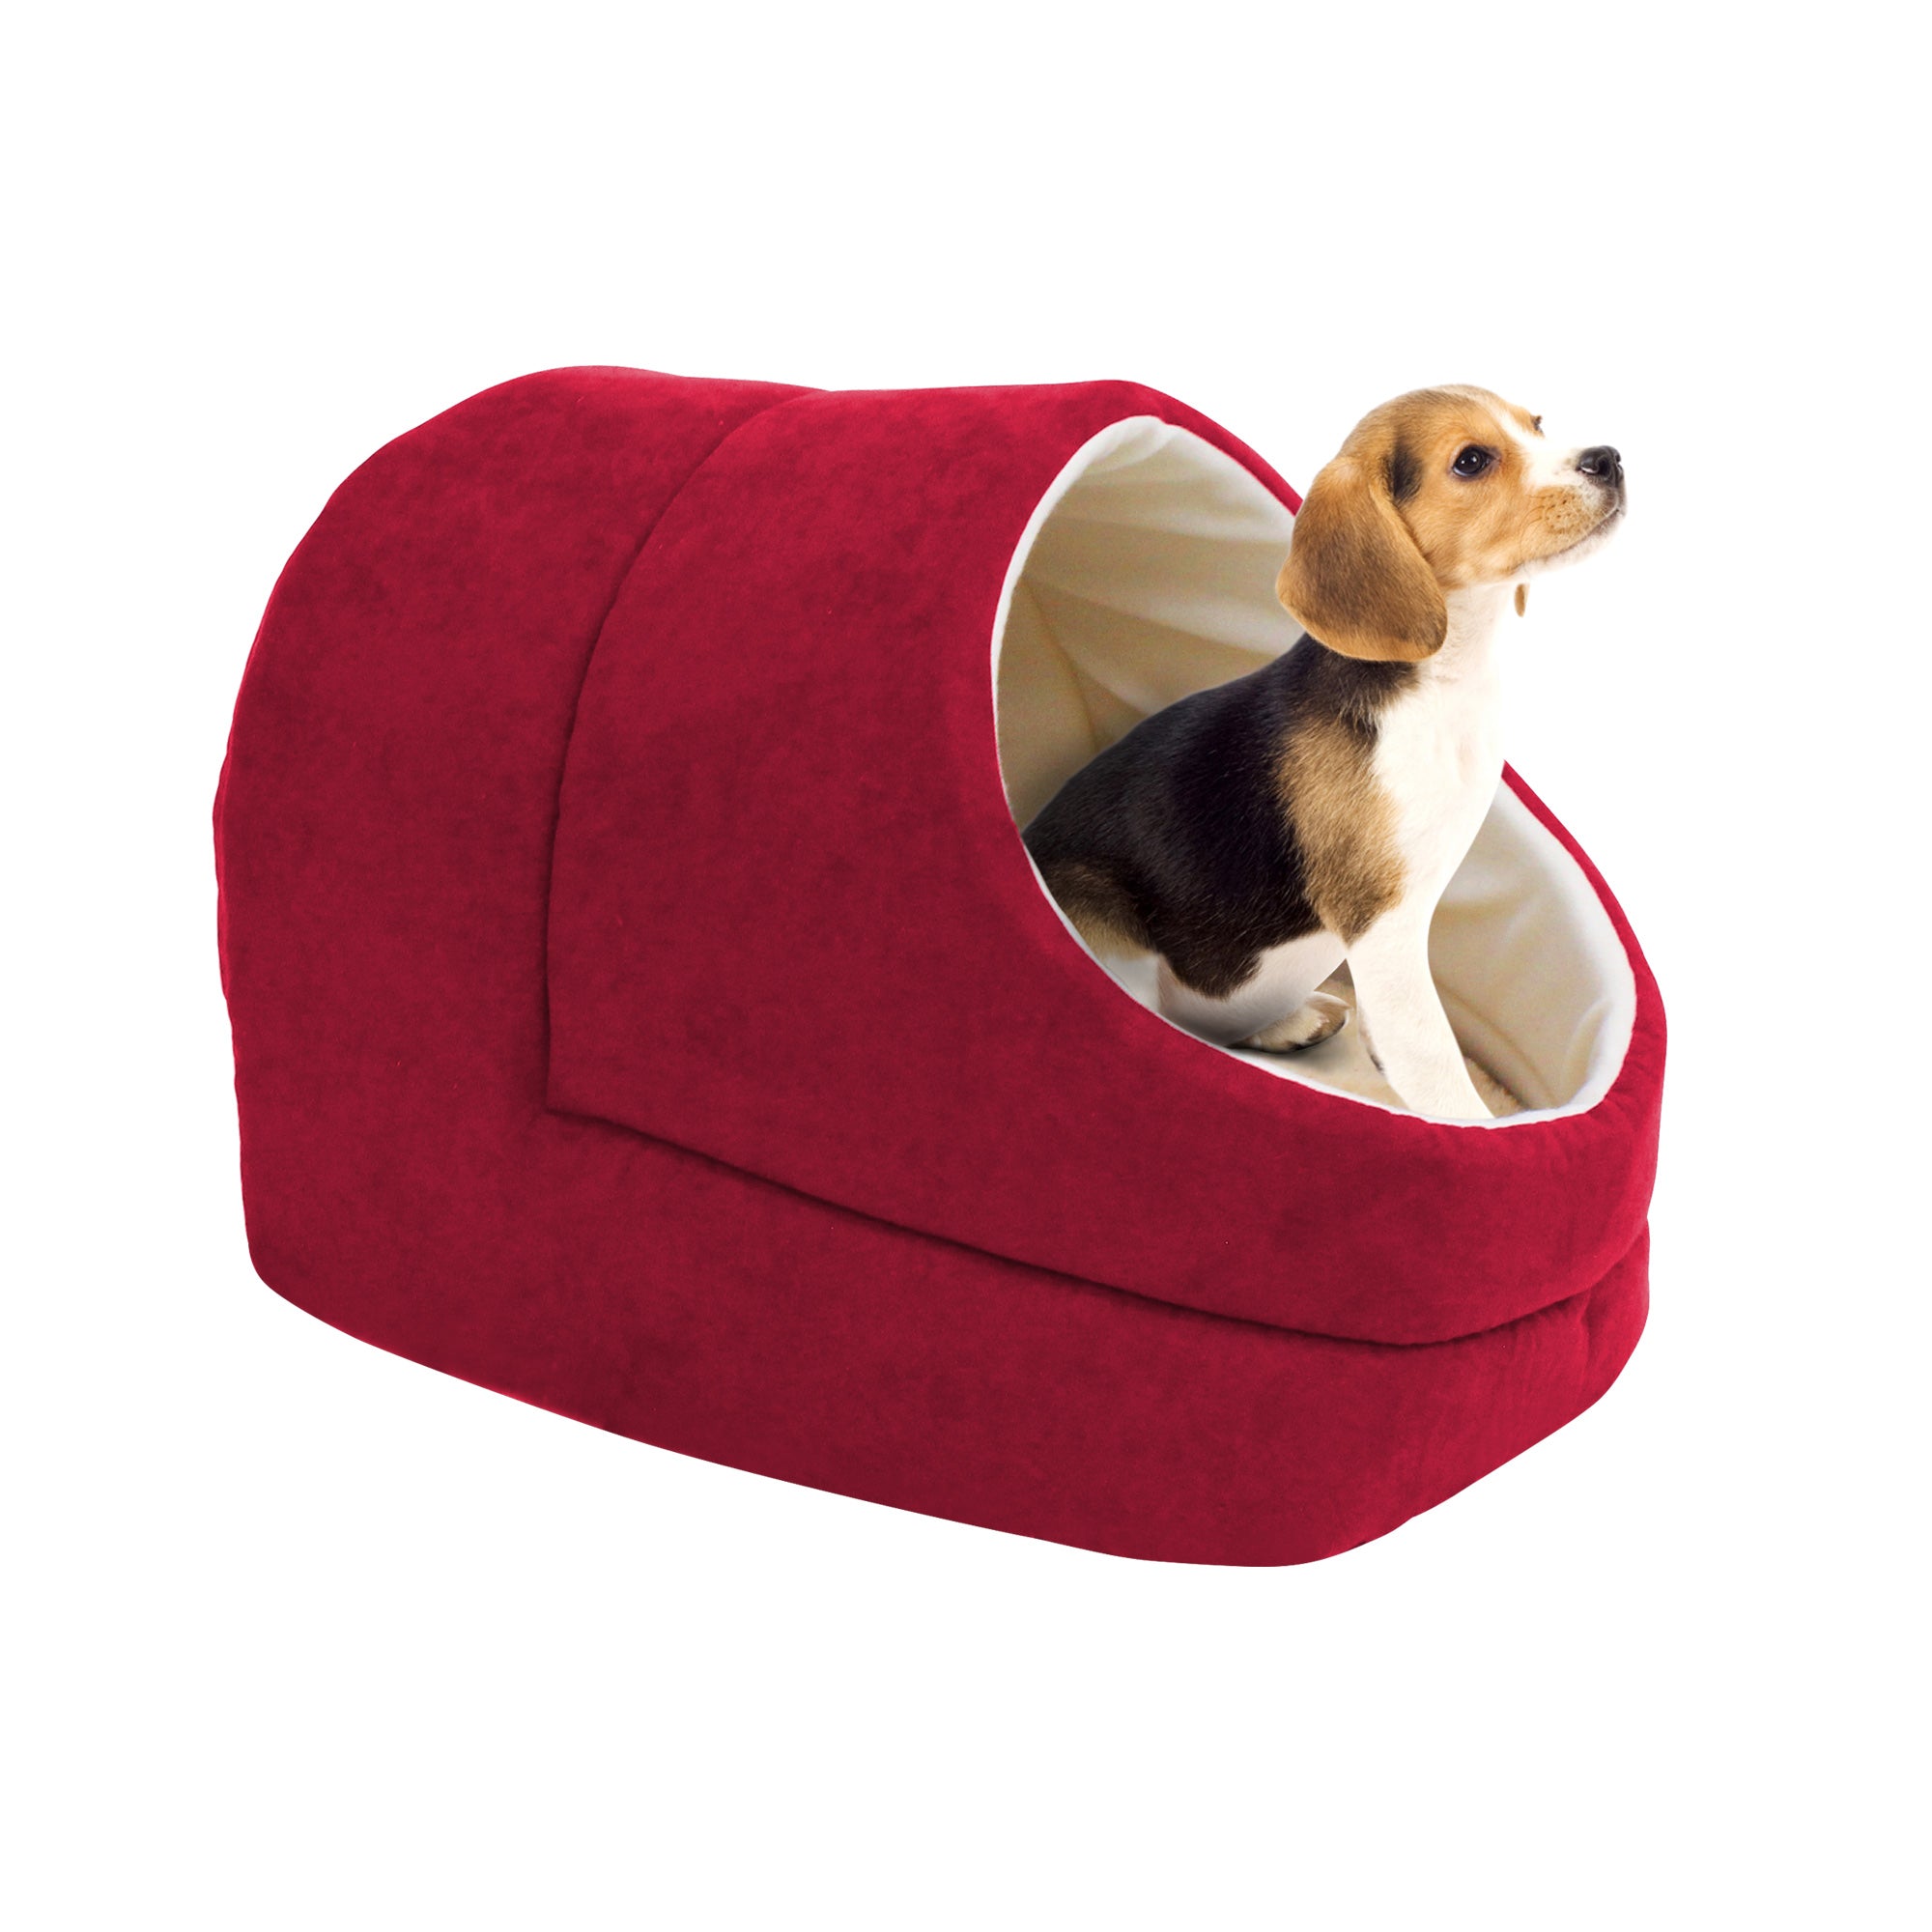 GOOPAWS Cave Covered Cat & Small Dog Warming Burrow Cat Bed, Burgundy